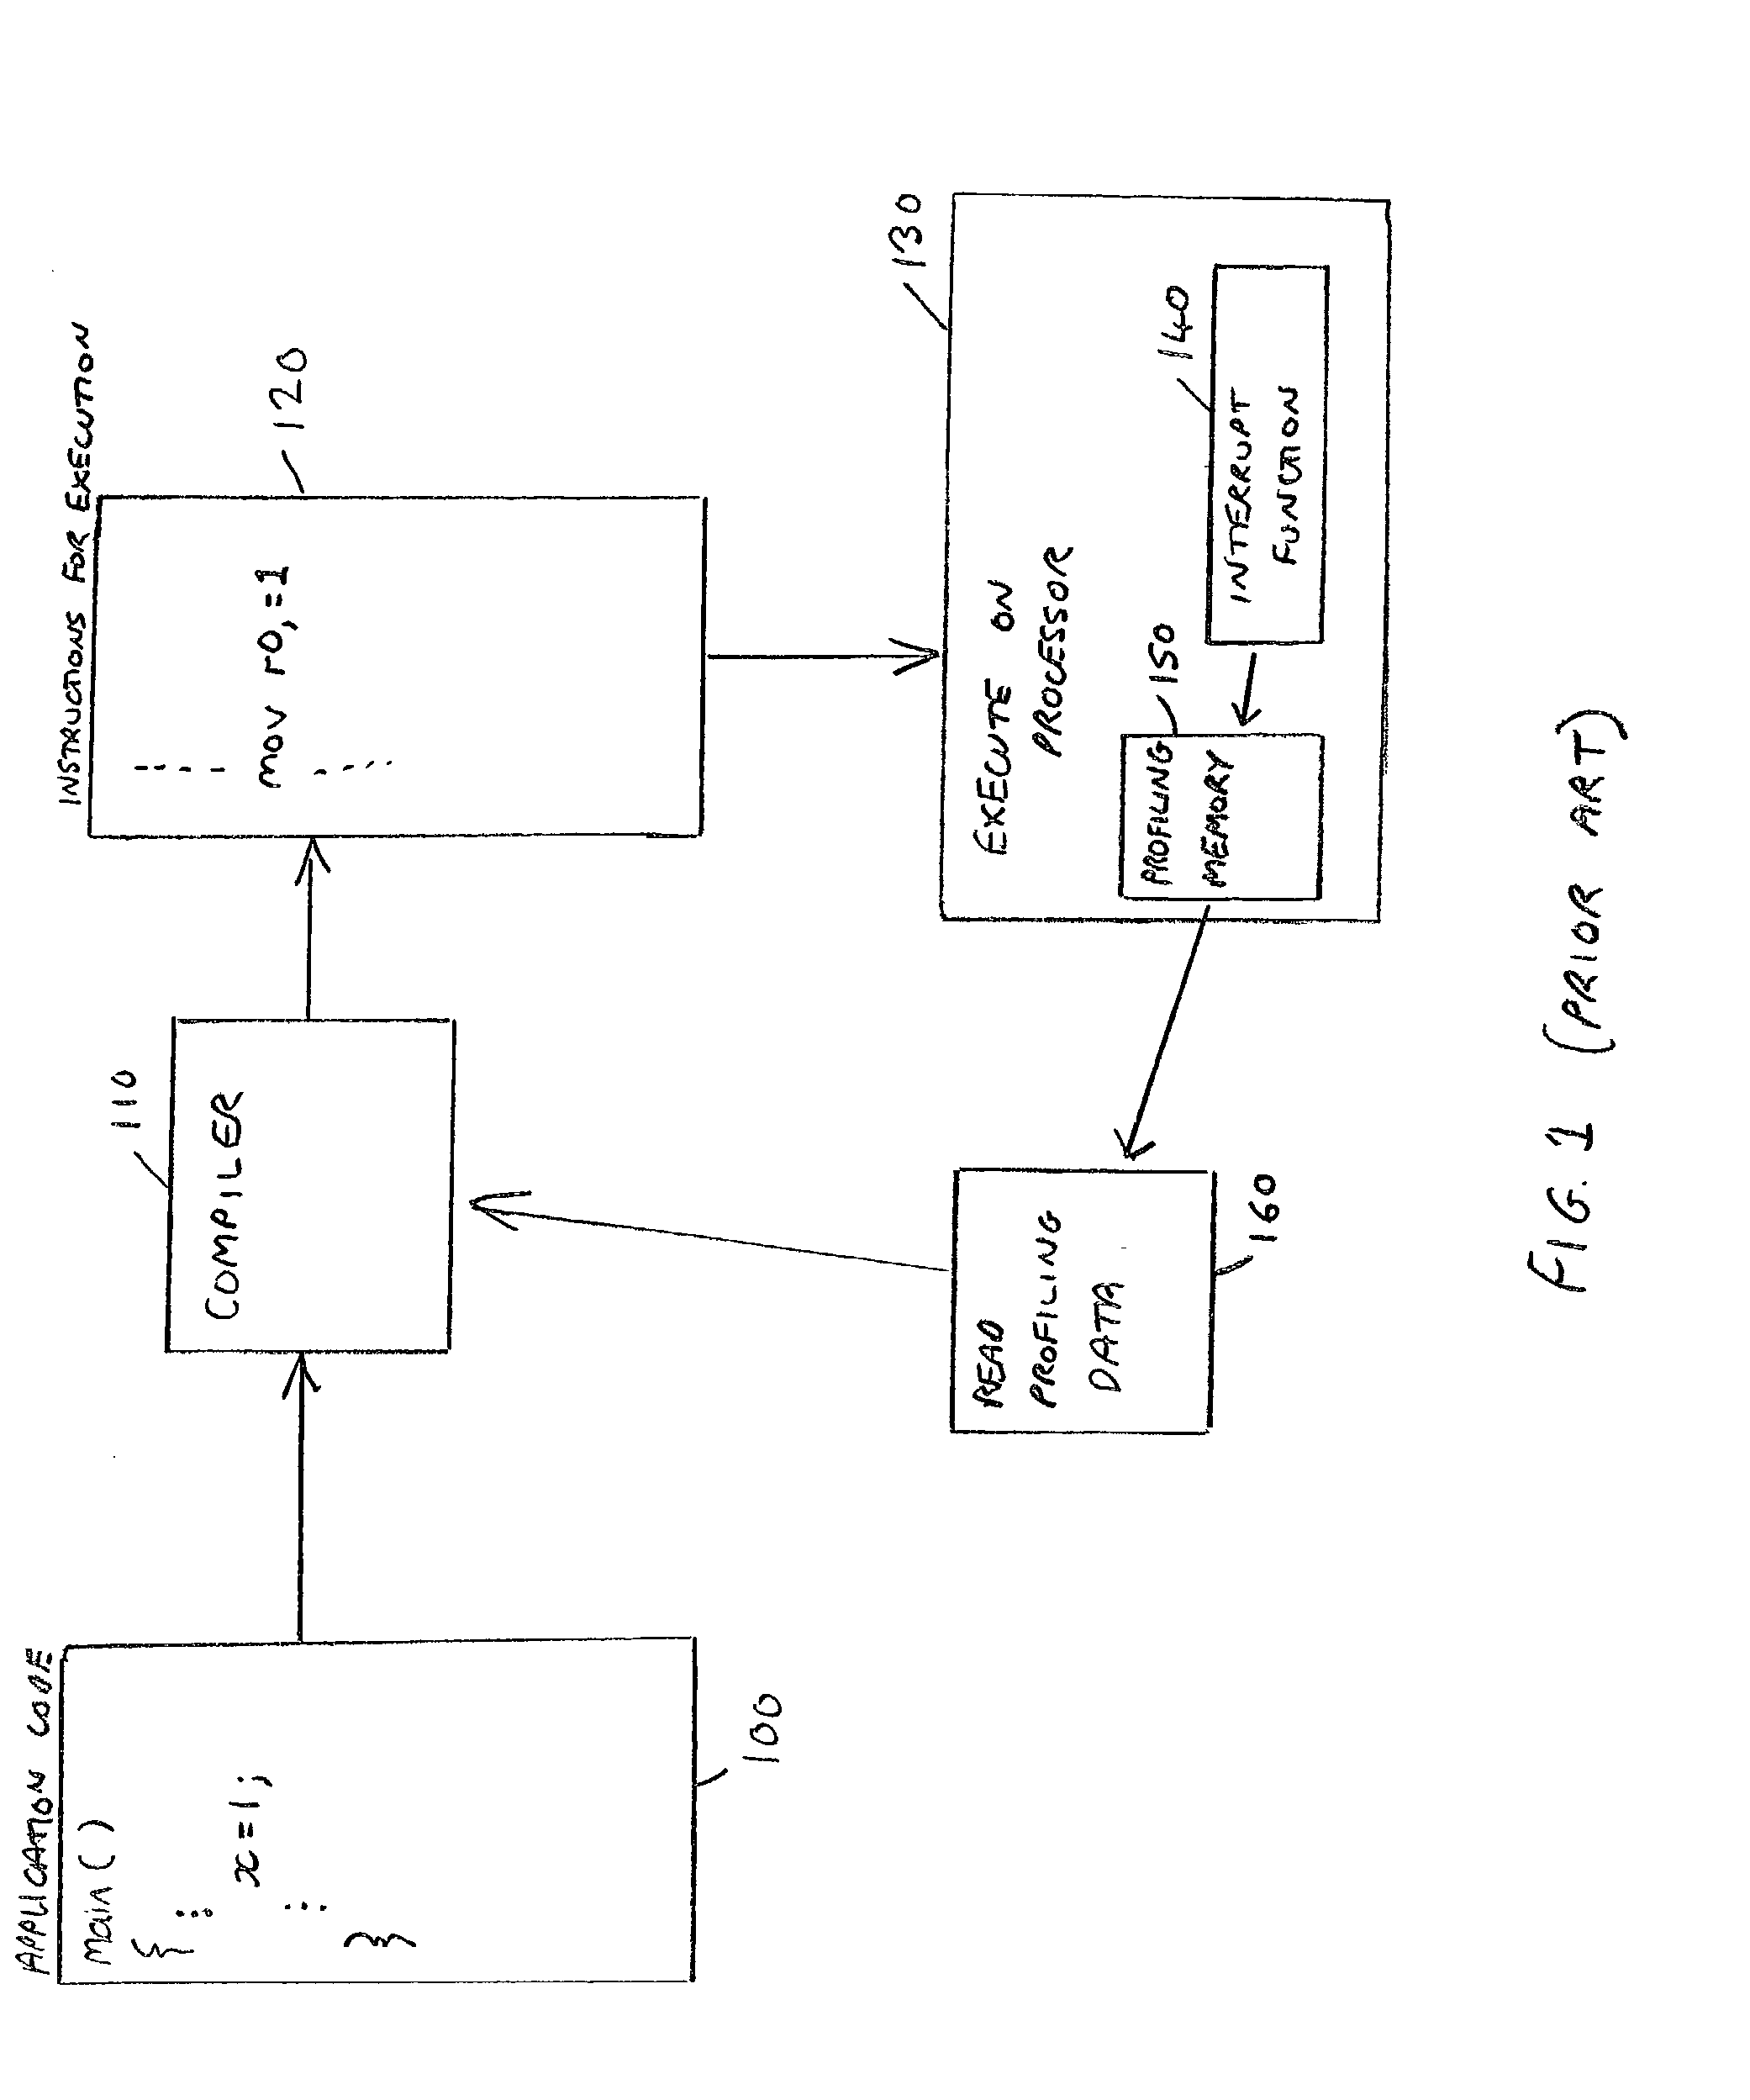 Compilation of application code in a data processing apparatus